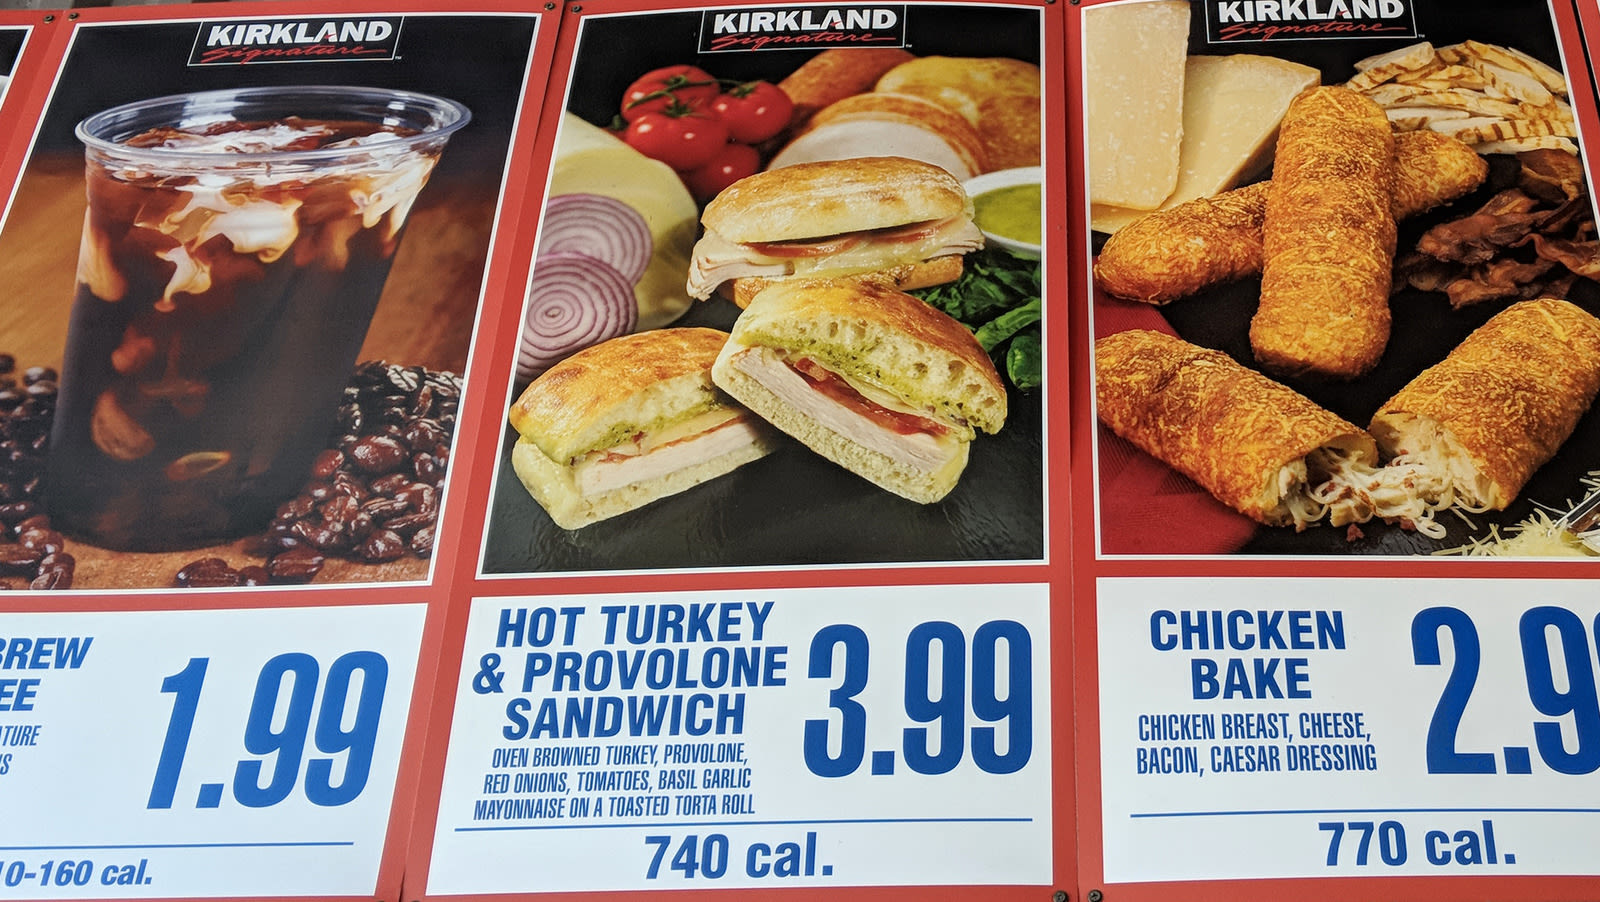 Whatever Happened To Costco's Hot Turkey And Provolone Sandwich